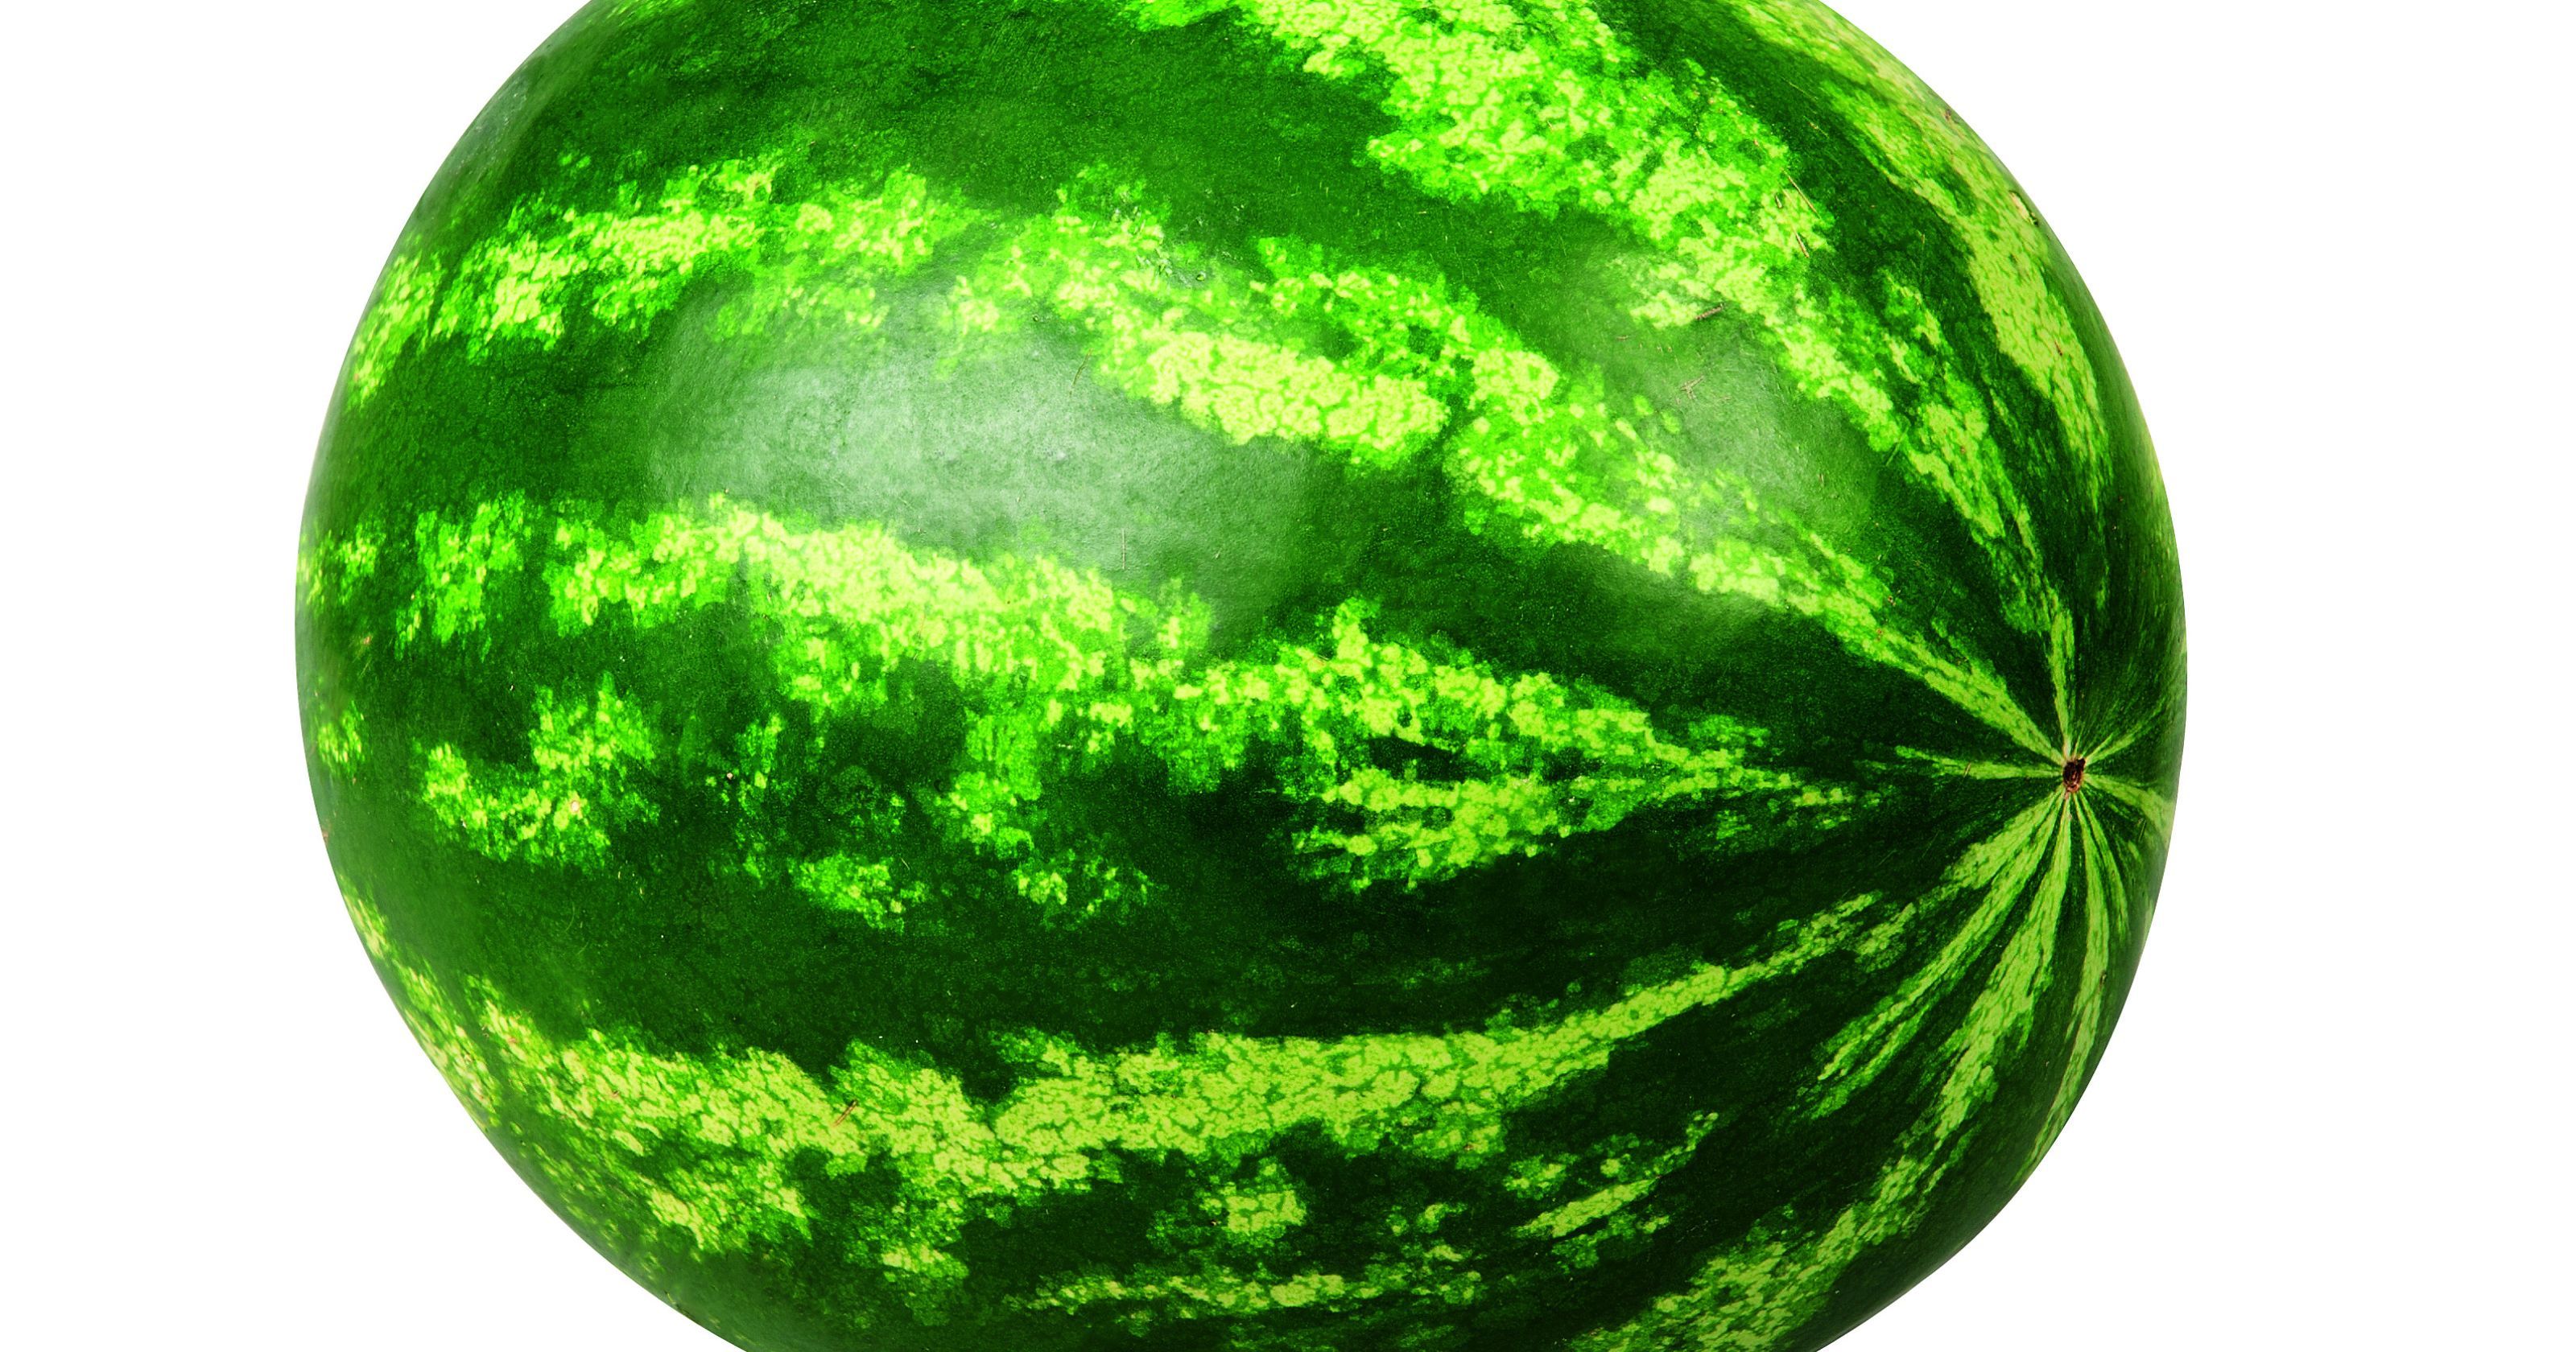 Man killed in Philadelphia when watermelons spilled by truck hit SUV